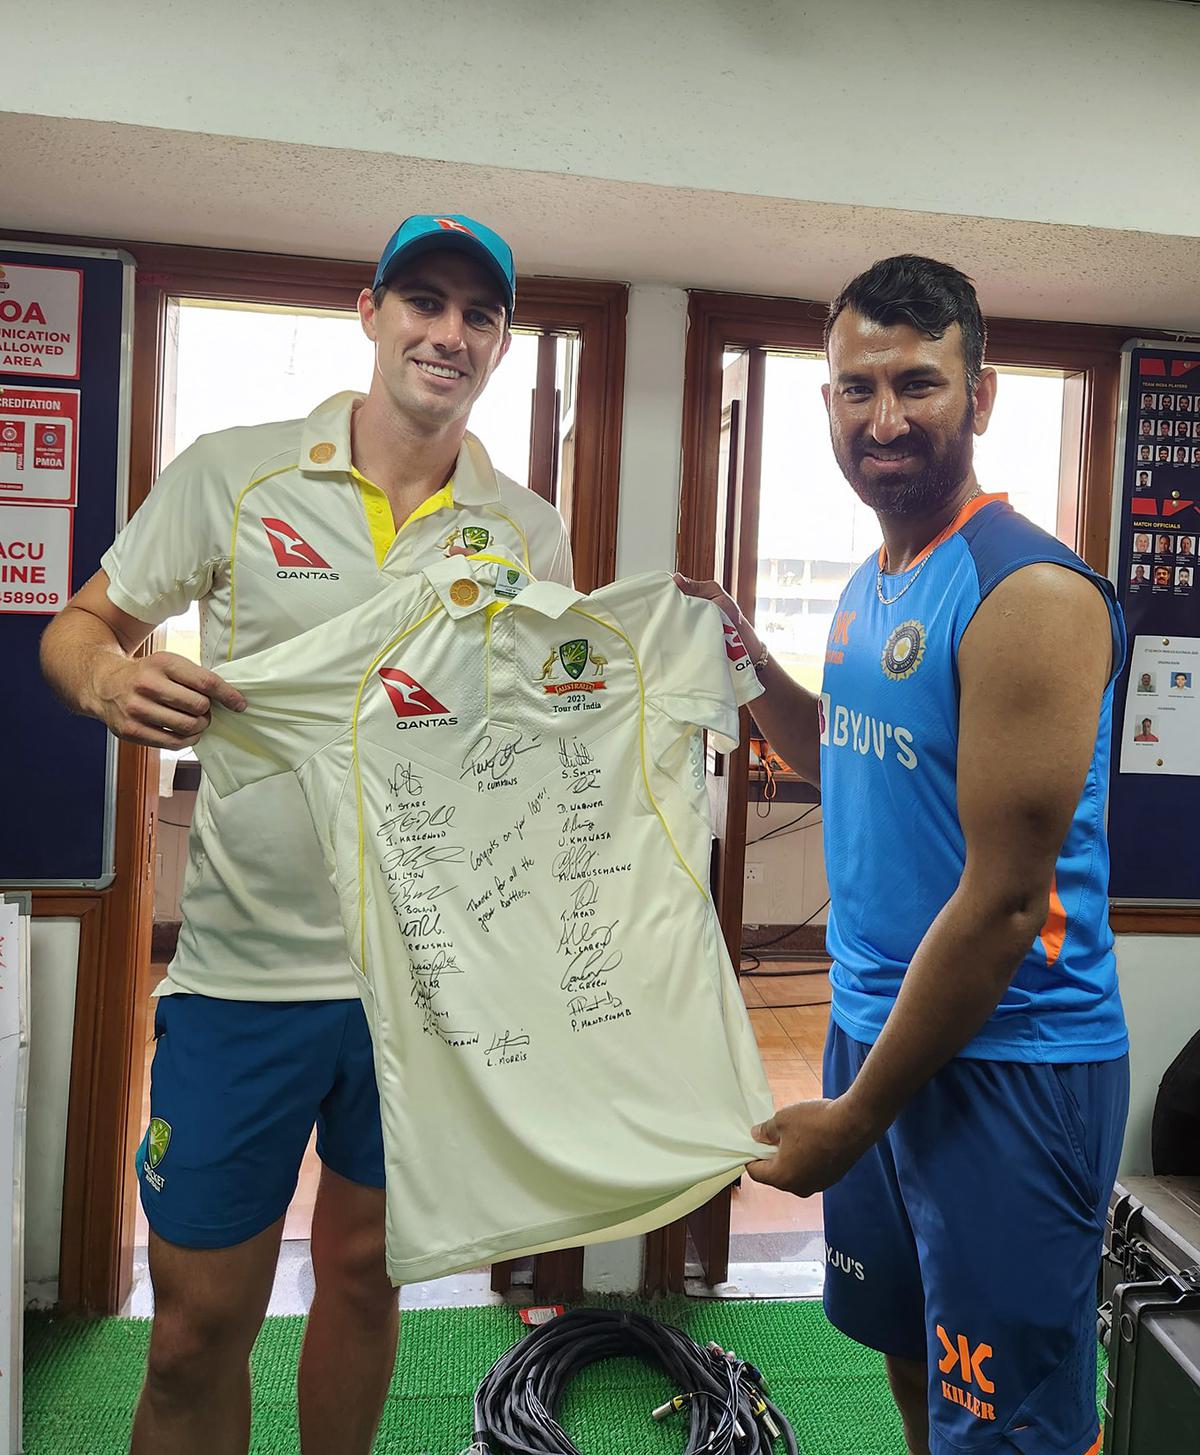 Australian skipper Pat Cummins gifted a signed jersey to Cheteshwar Pujara, commemorating Pujara’s 100th Test match appearance after the third day of the second test match, at Arun Jaitley Stadium, in New Delhi on Sunday. India won the match by 6 wickets | Photo Credit: ANI